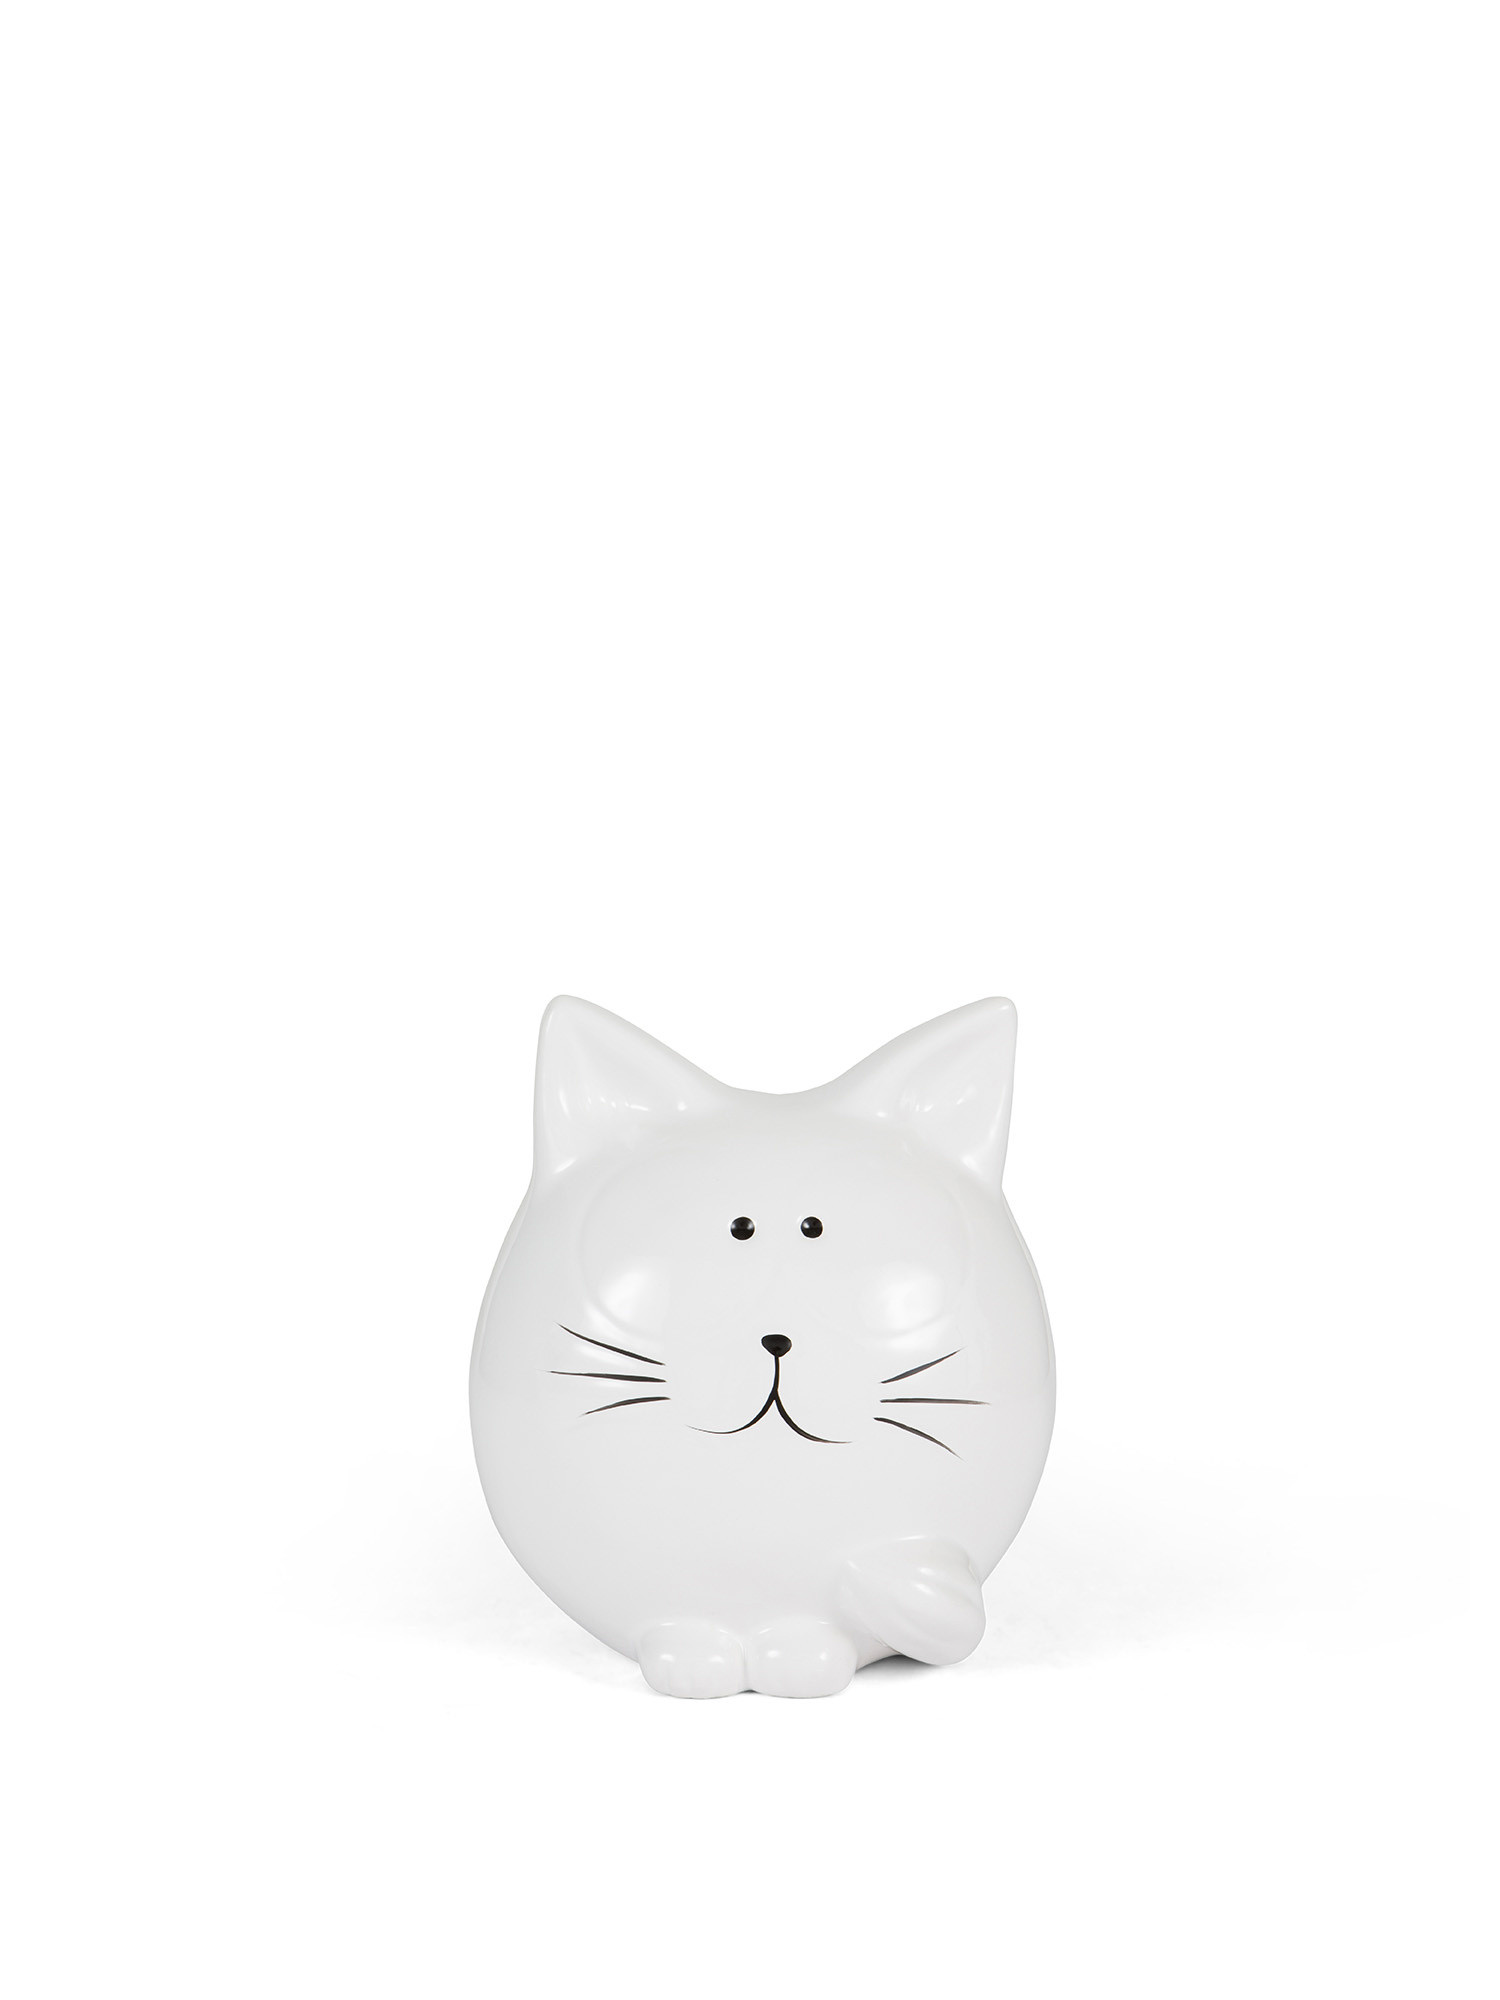 Ceramic cat humidifier, White, large image number 0